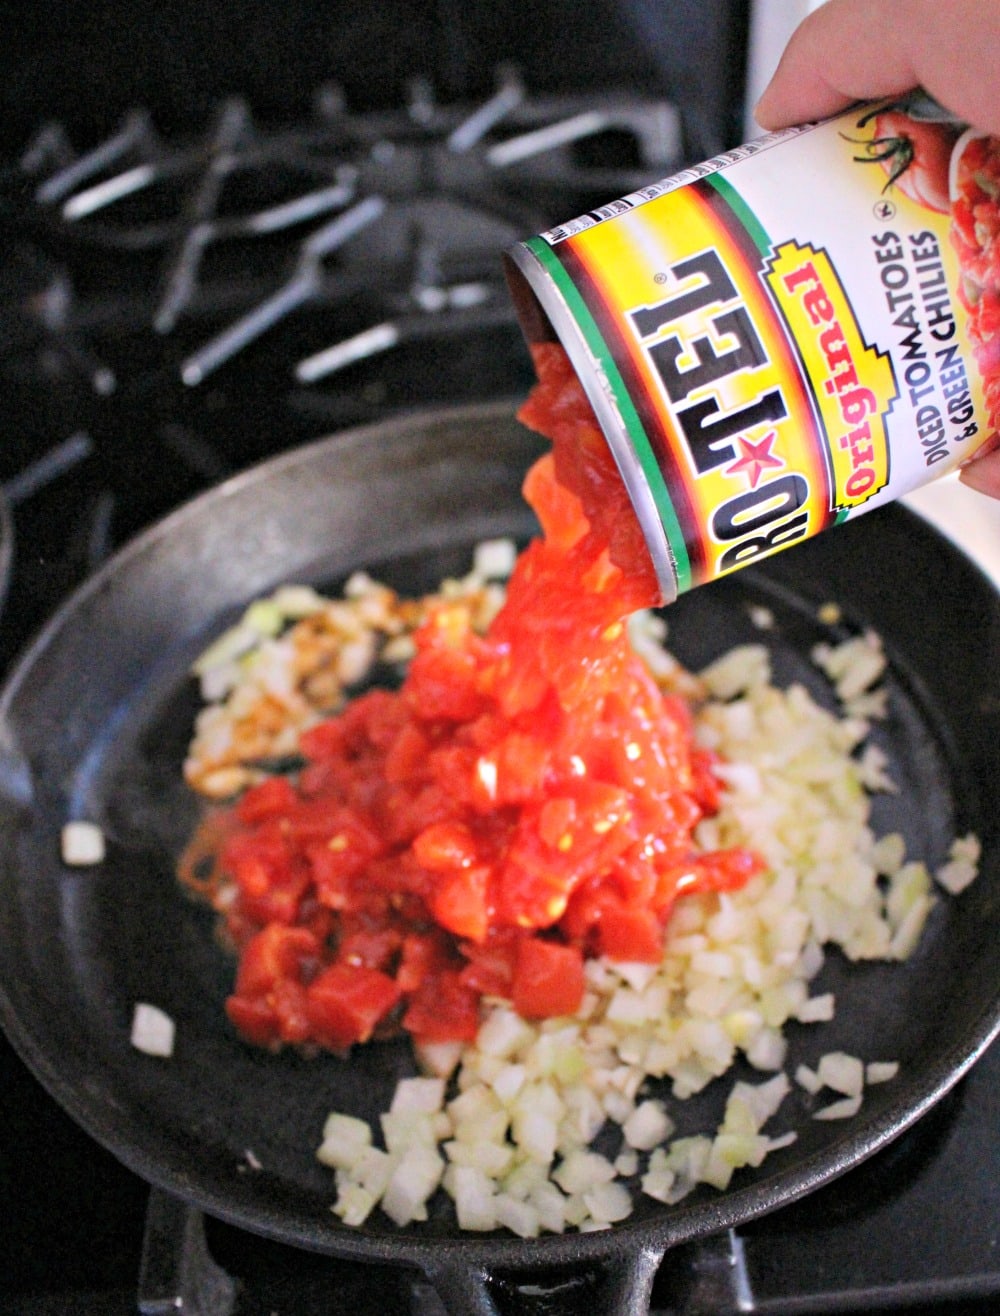 A hand pouring the tomatoes from a Ro*tel can into a skillet.